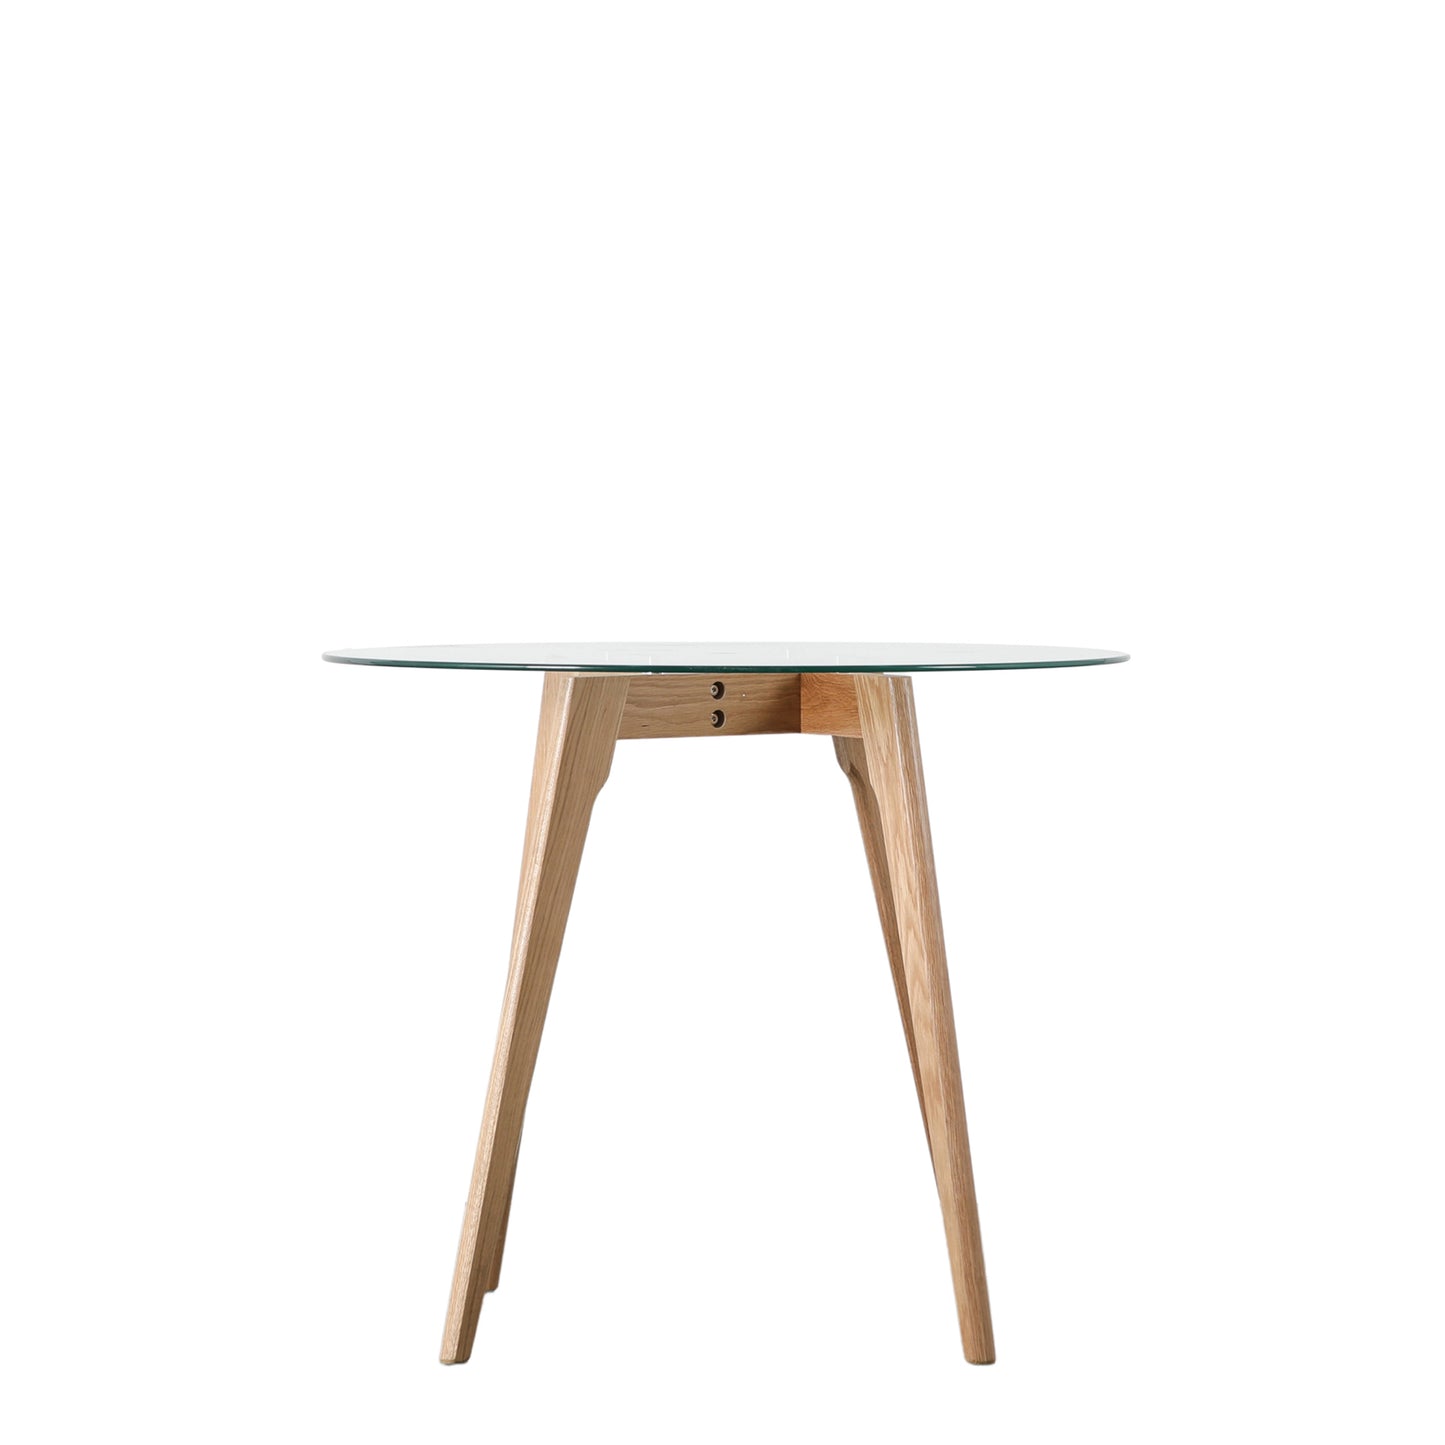 An Ashprington Round Dining Table Oak 900x900x750mm with wooden legs and a glass top, perfect for interior decor.